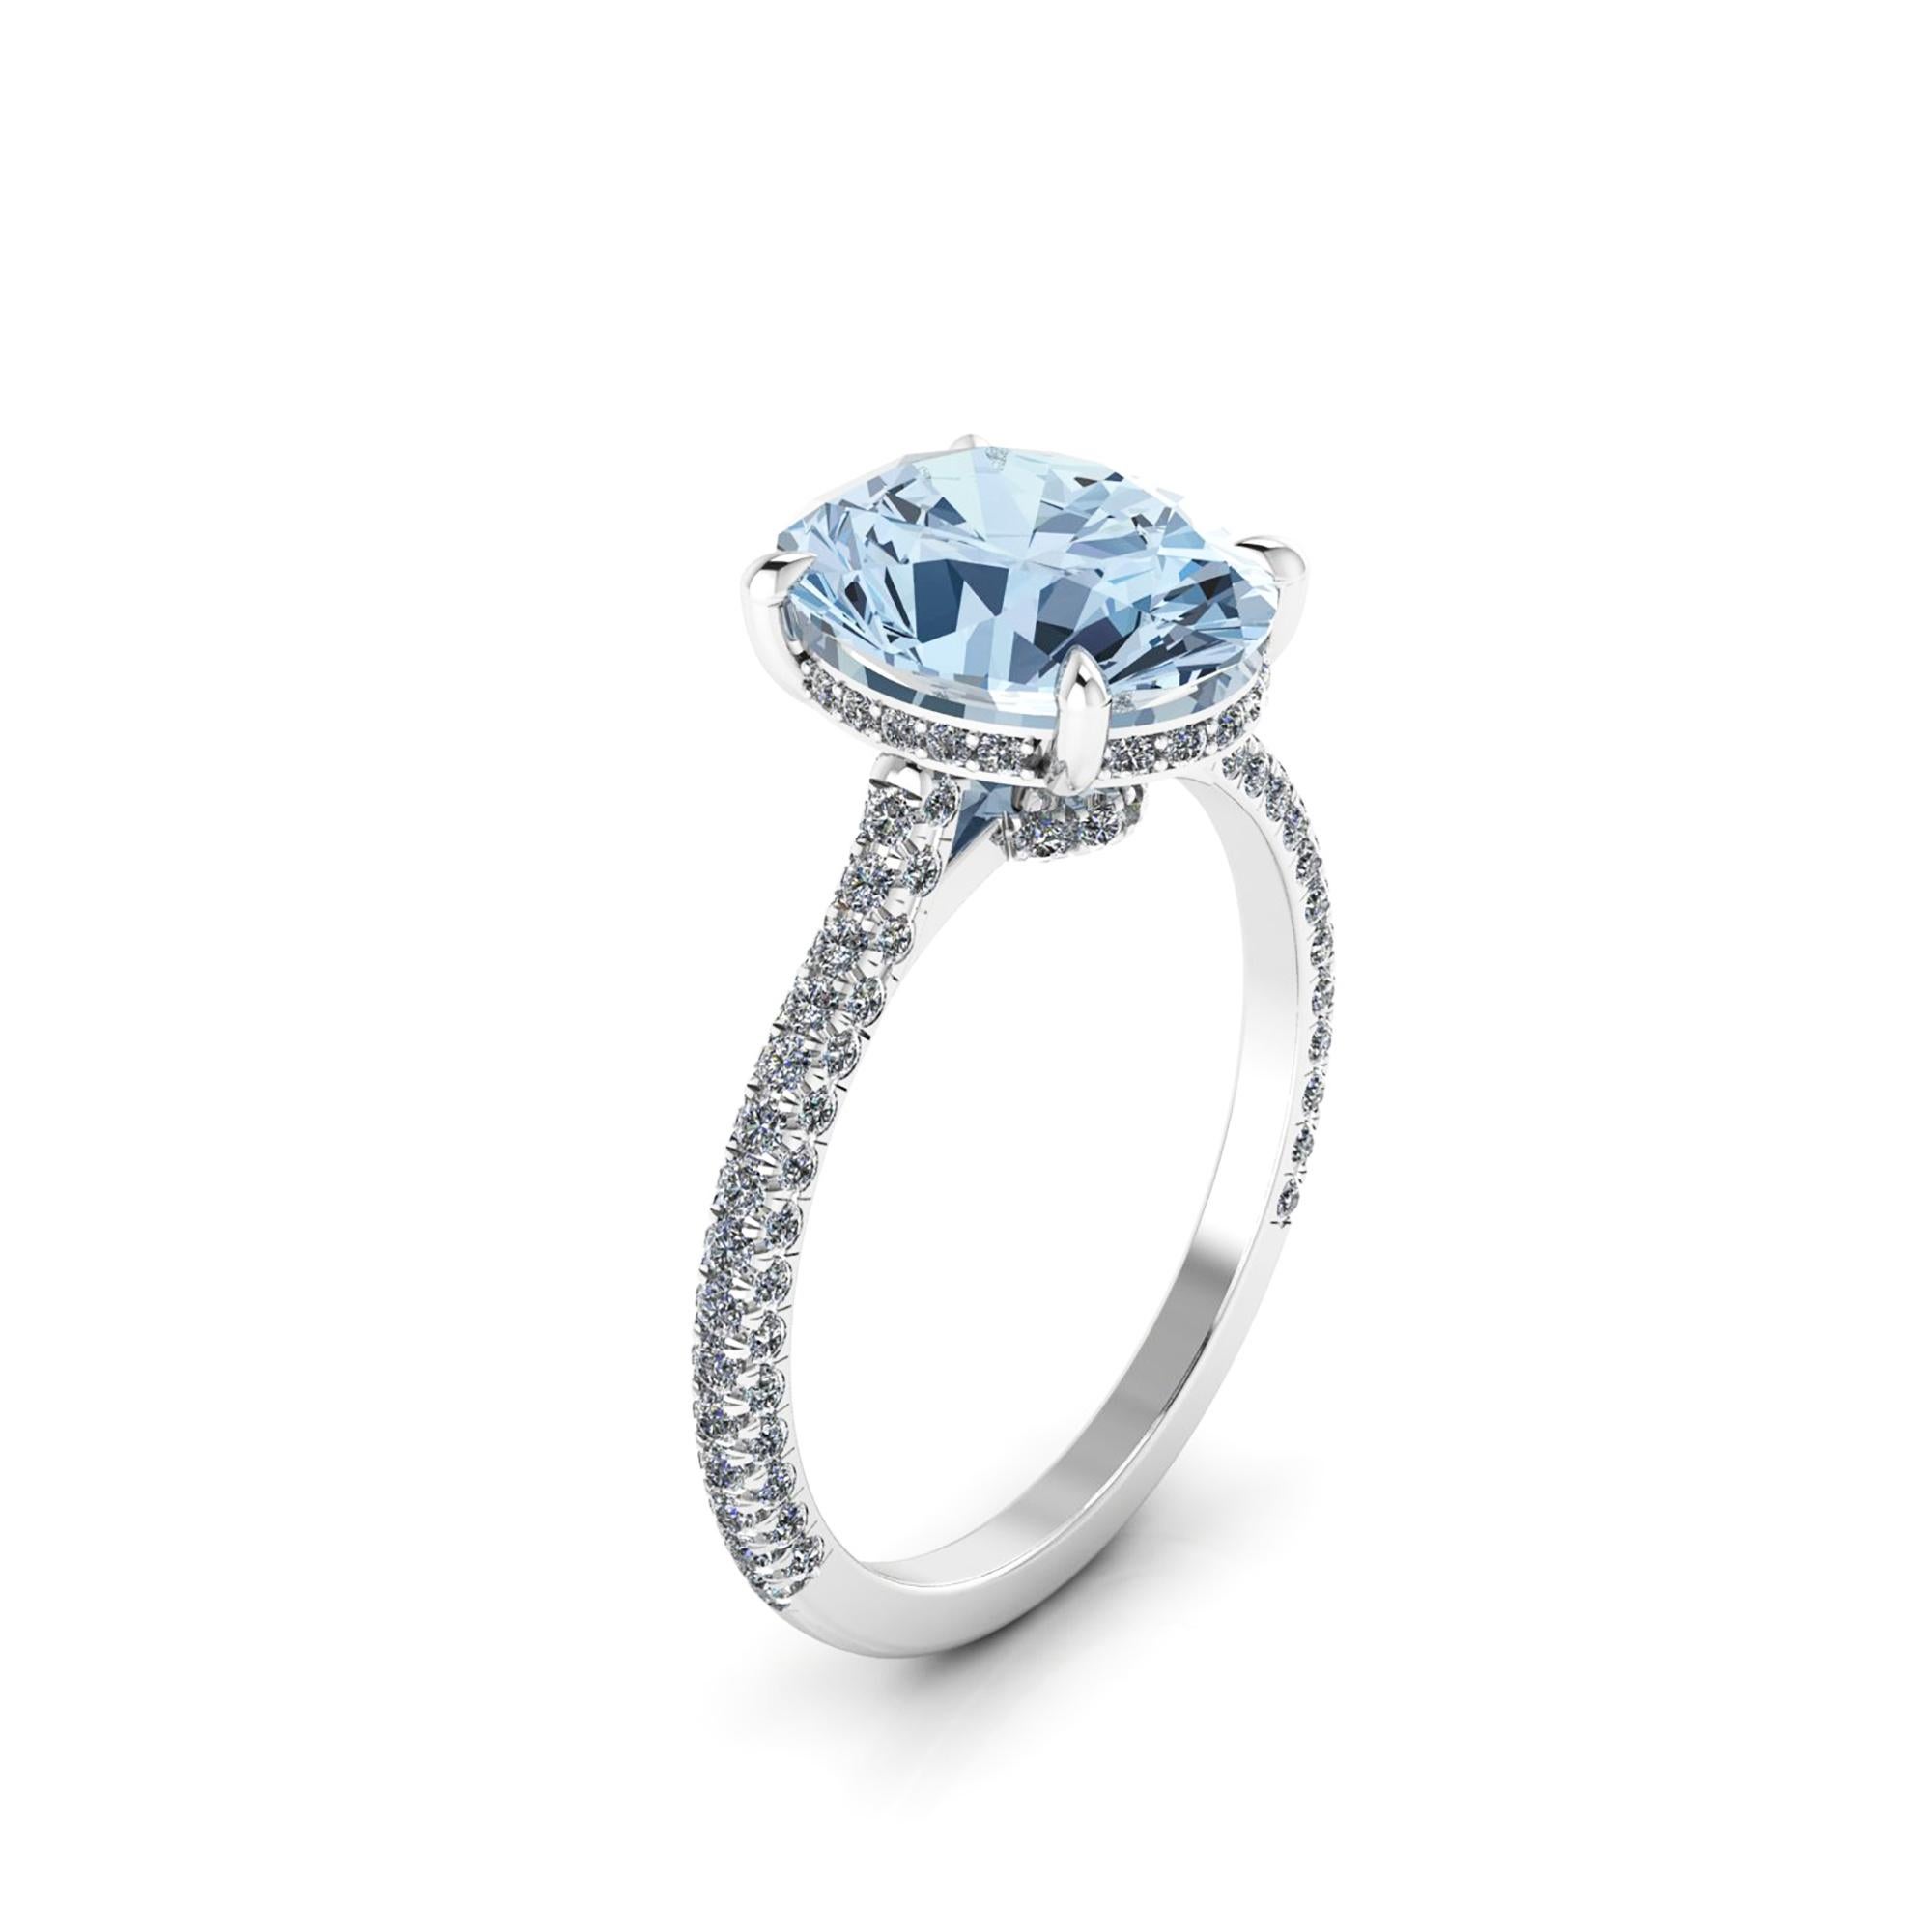 A  2.5 carat Oval light blue Aquamarine, hand cut, set on a Platinum 950 ring, designed and hand made in New York 
adorned by white round diamonds, hand set, for an approximate 0.50 carats, for a maximum shine and sparkle.

This ring's size is 5